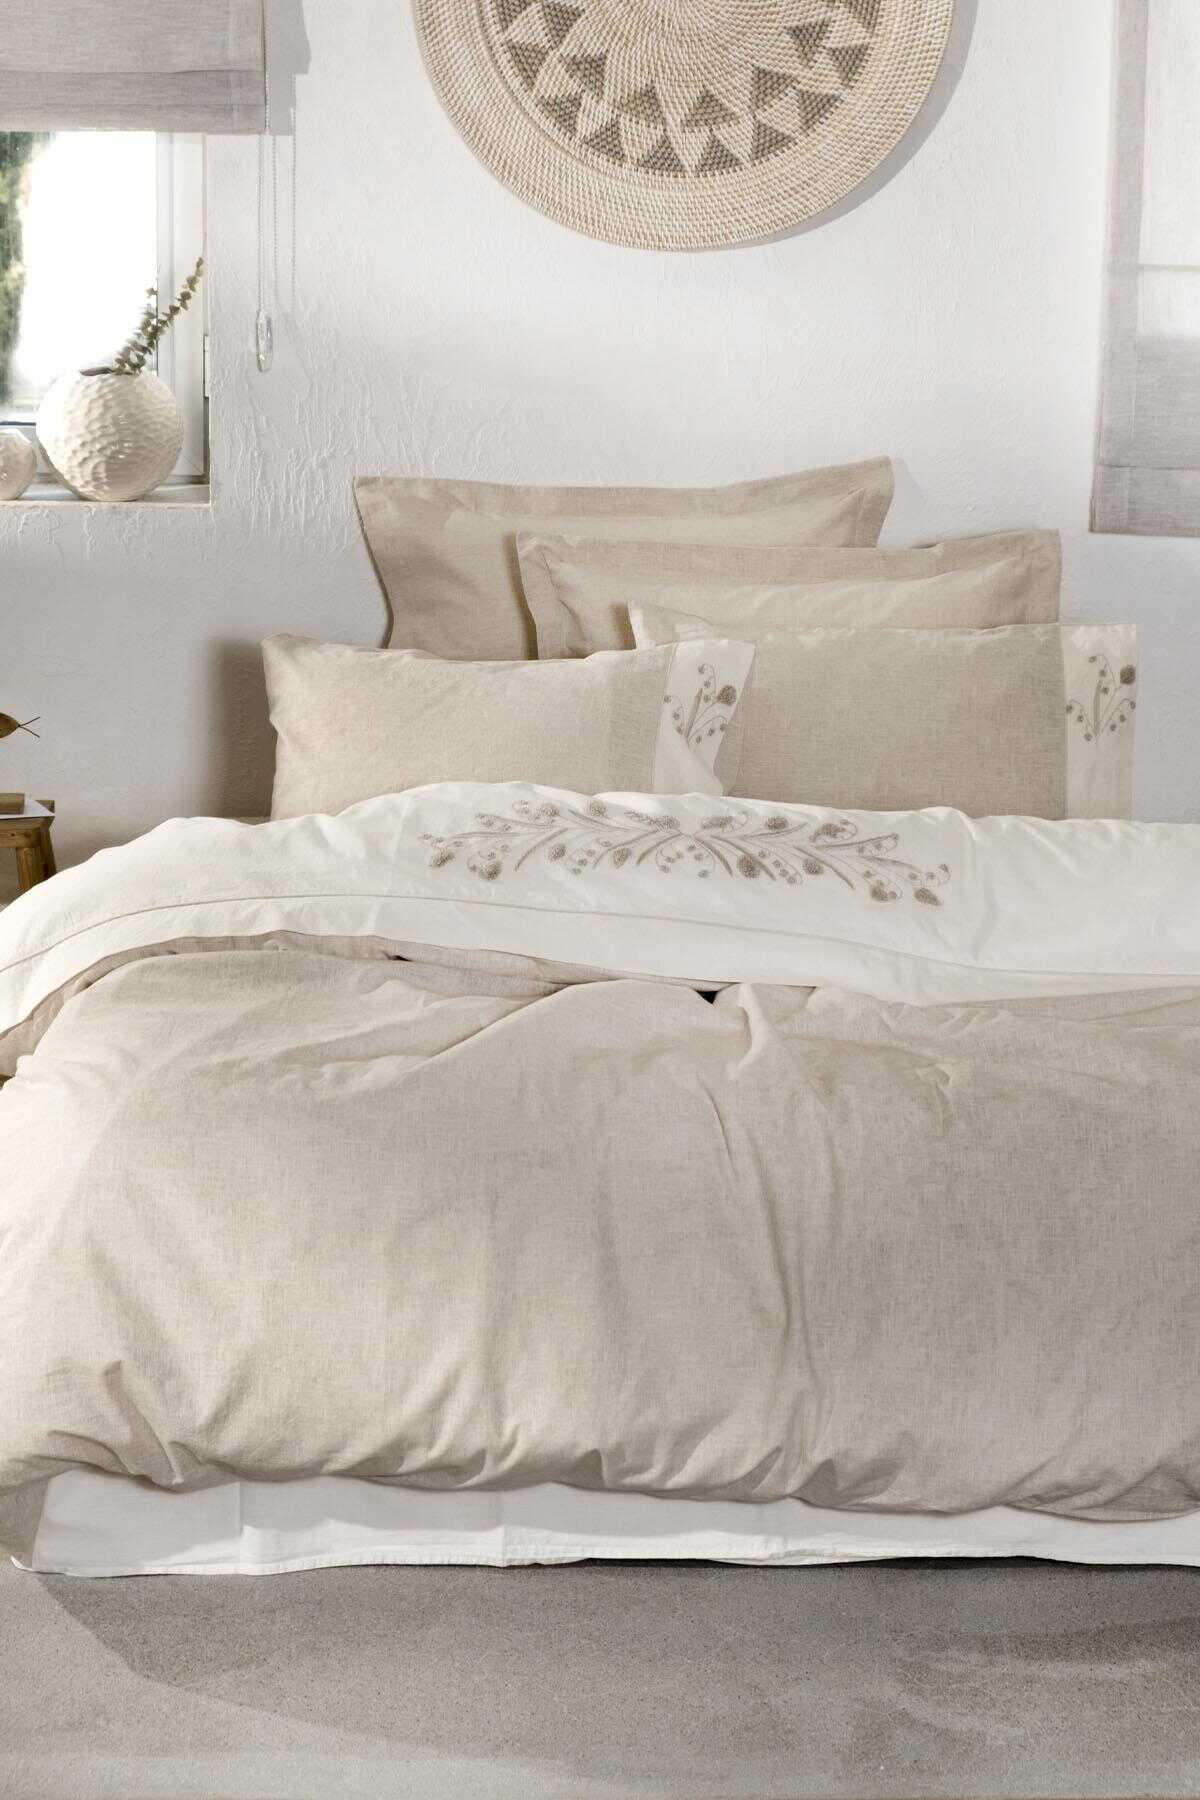 Ecocotton Lilya Organic Cotton Linen Embroidered Ecolarge Duvet Cover Set